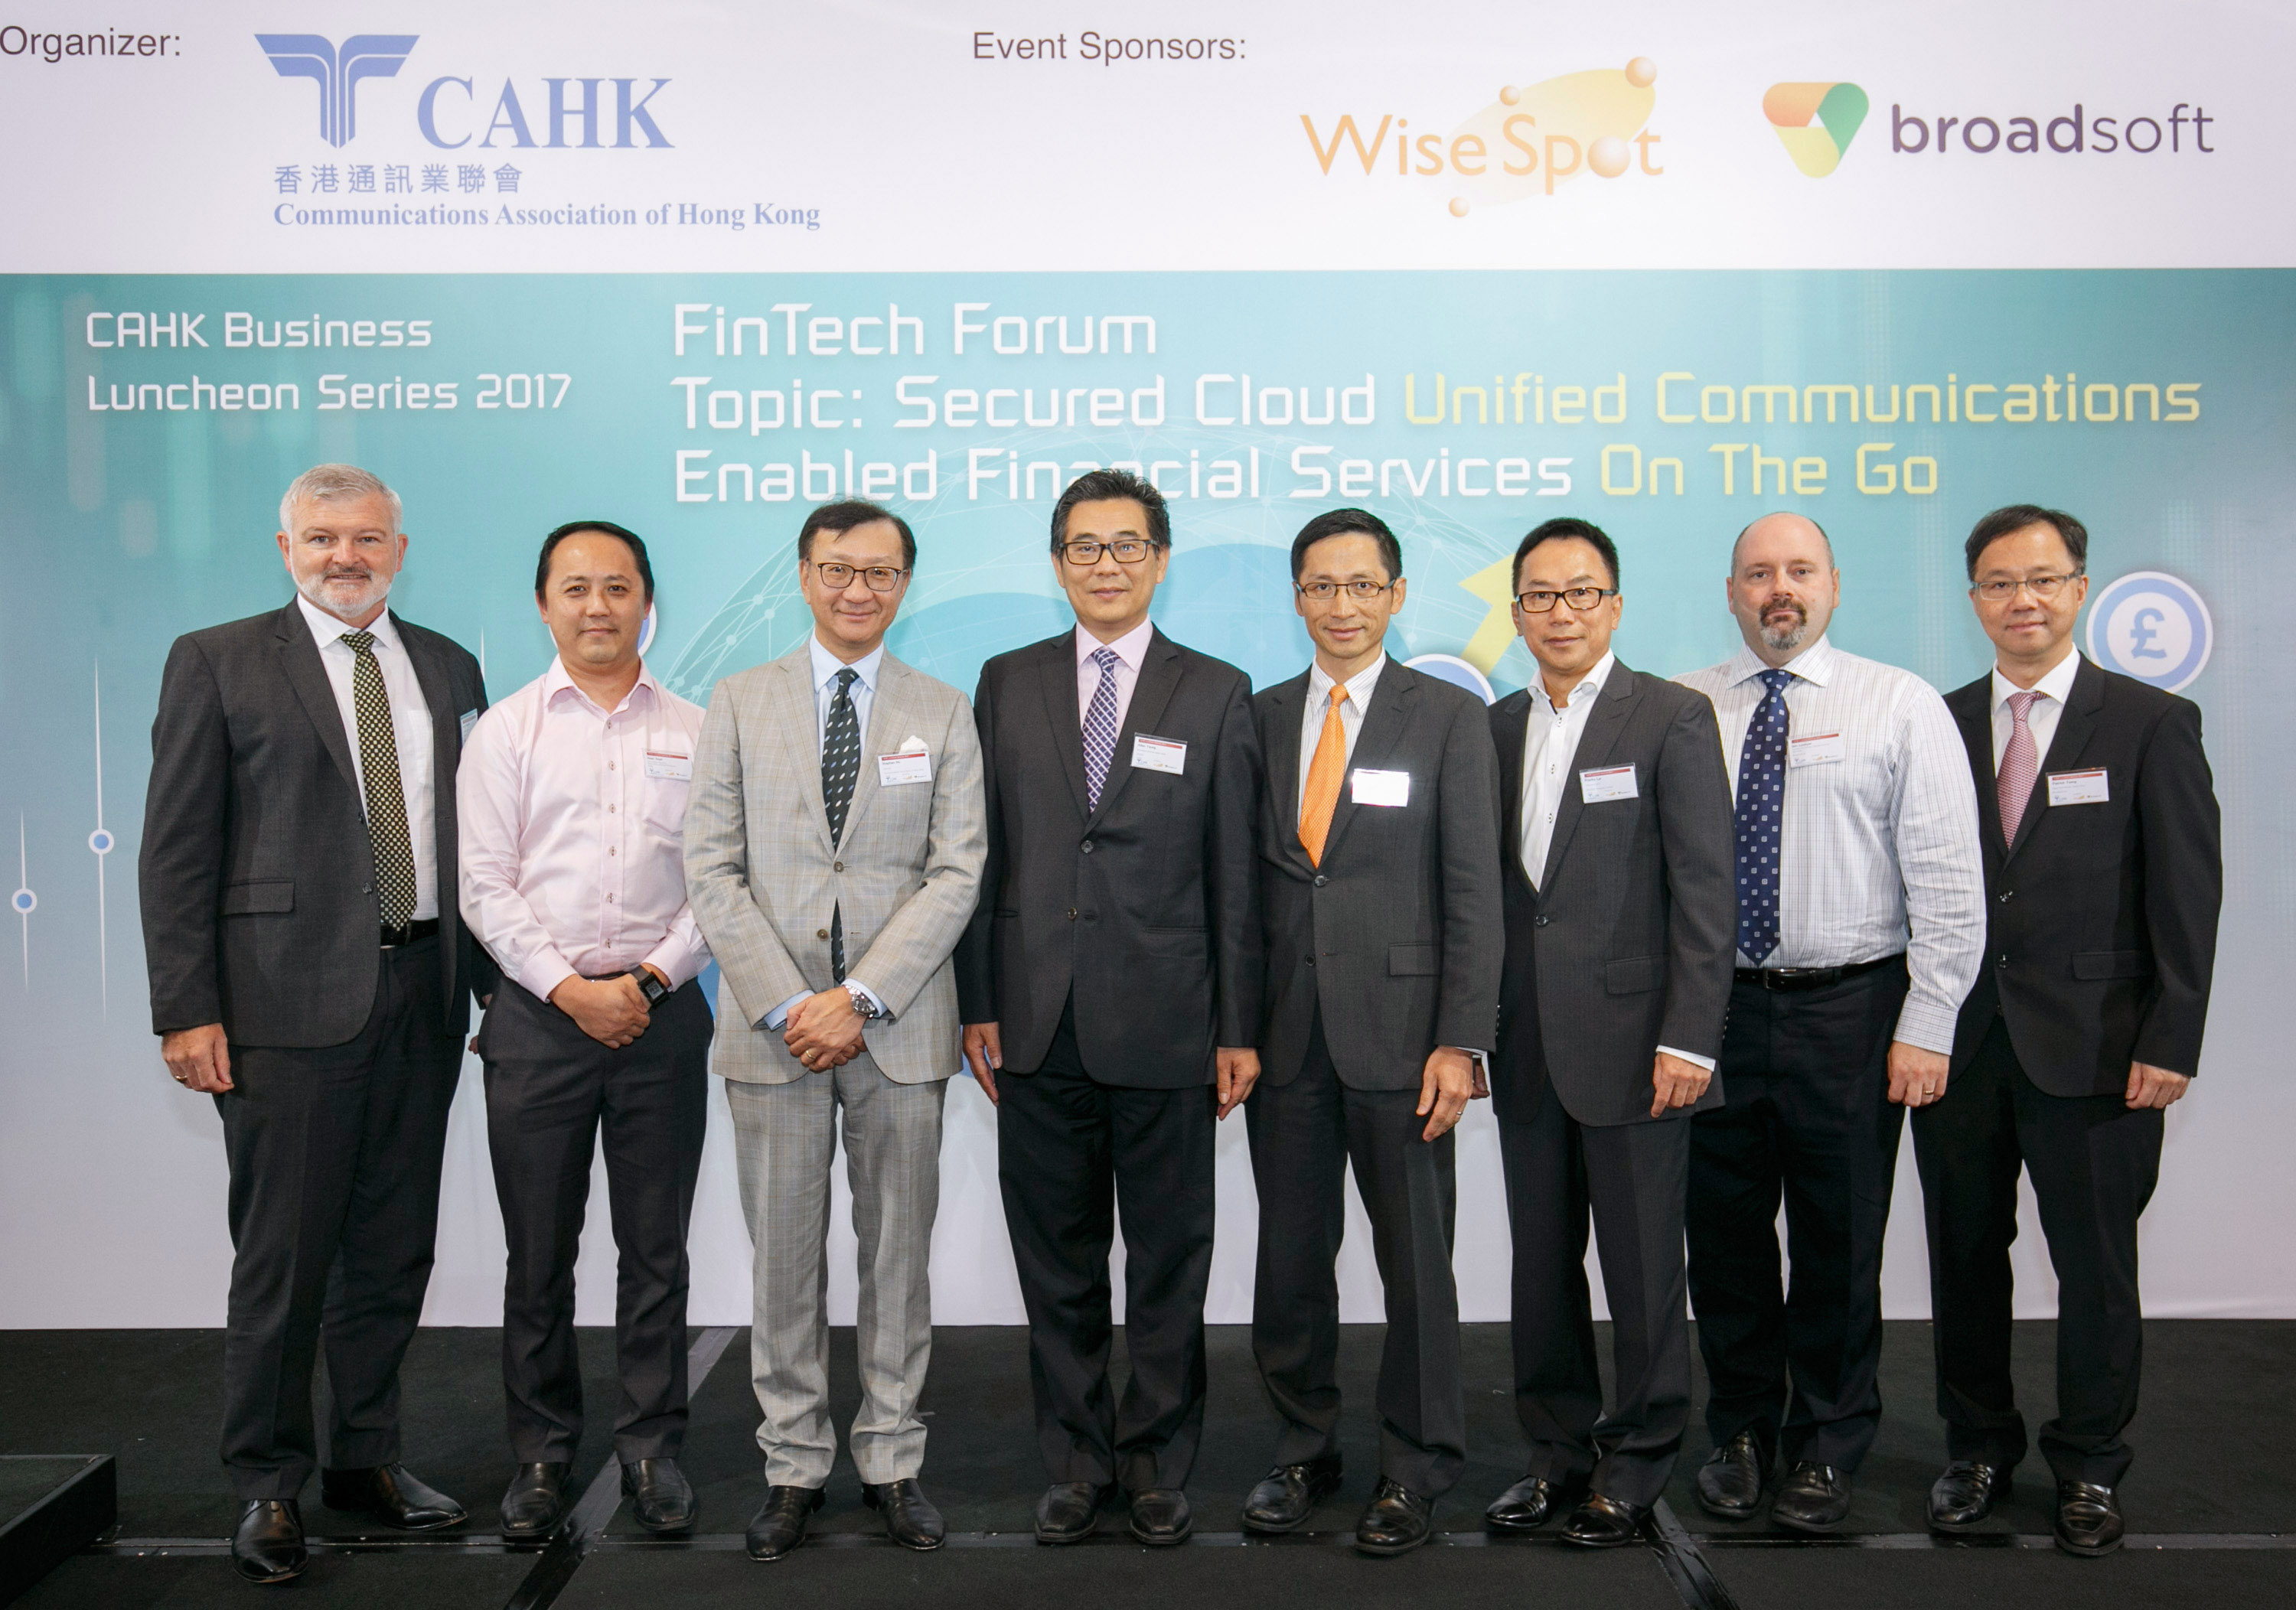 Ir Allen Yeung, Government Chief Information Officer, in group photo with Mr Stephen Ho, Chairman, CAHK (3rd left), Mr Brian Lee, Head, Operational, Technology & Treasury Risks Division, Banking Supervision Department, HKMA (4th right), Mr Sean Seah, Head of Digital Experience, HSBC (2nd left), Mr Franky Lai, Vice Chairman, CAHK (3rd right), Mr Kelvin Beadle, Vice President Asia, Broadsoft Inc. (leftmost) , Mr Iain Lockyer, Associate Vice President, Strategic Initiatives, Asia Pacific Broadsoft Inc. (2nd right) and Mr Patrick Tsang, Regional Sales Director, Greater China, Broadsoft Inc. (rightmost).